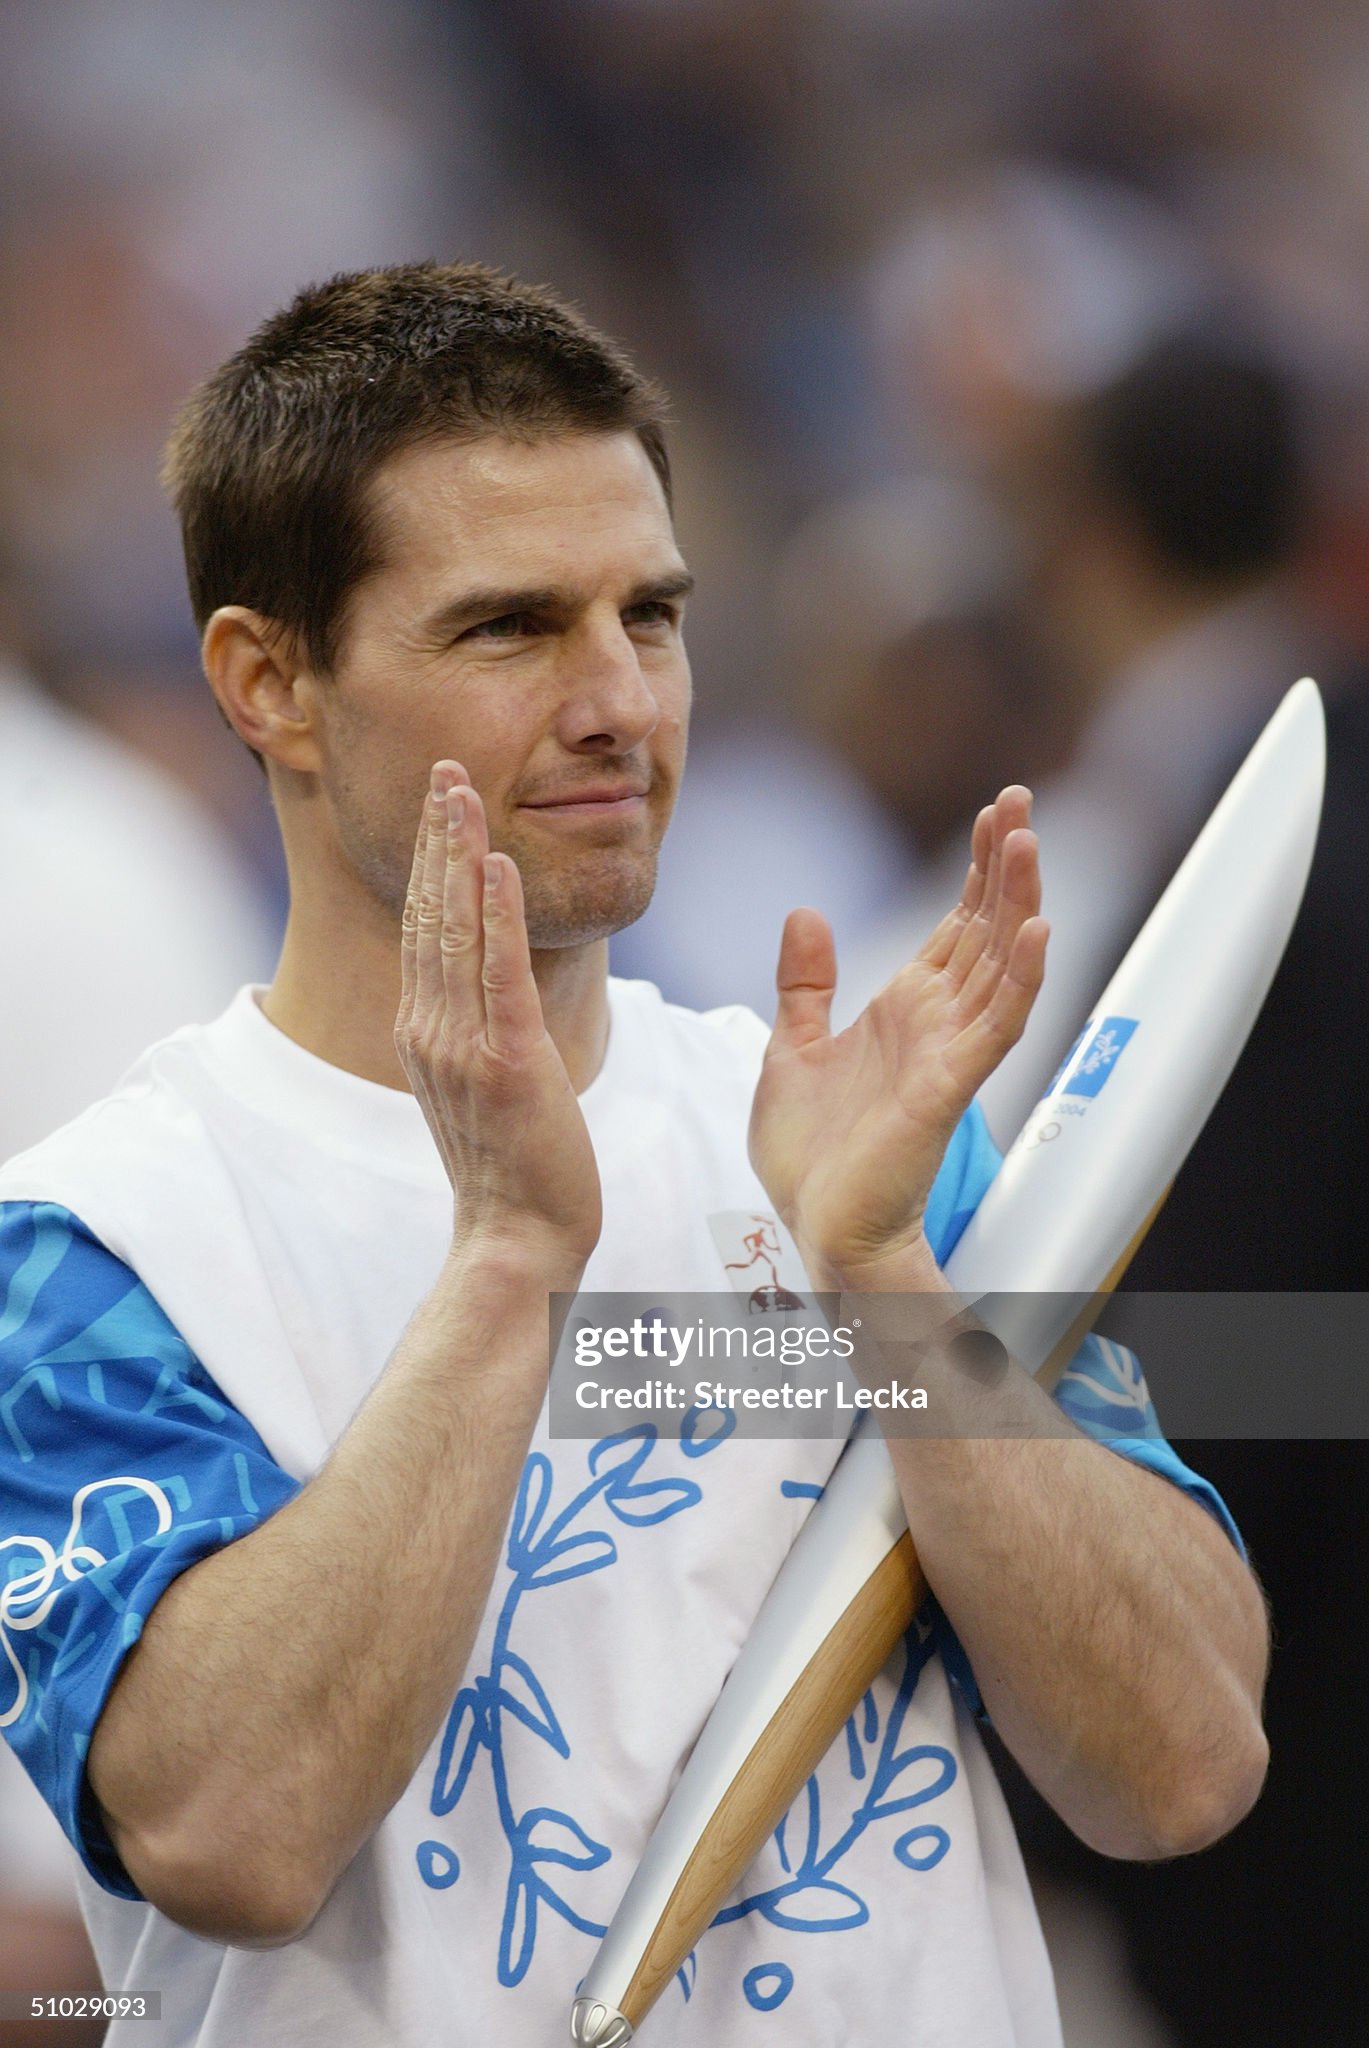 gettyimages-51029093-2048x2048.jpg